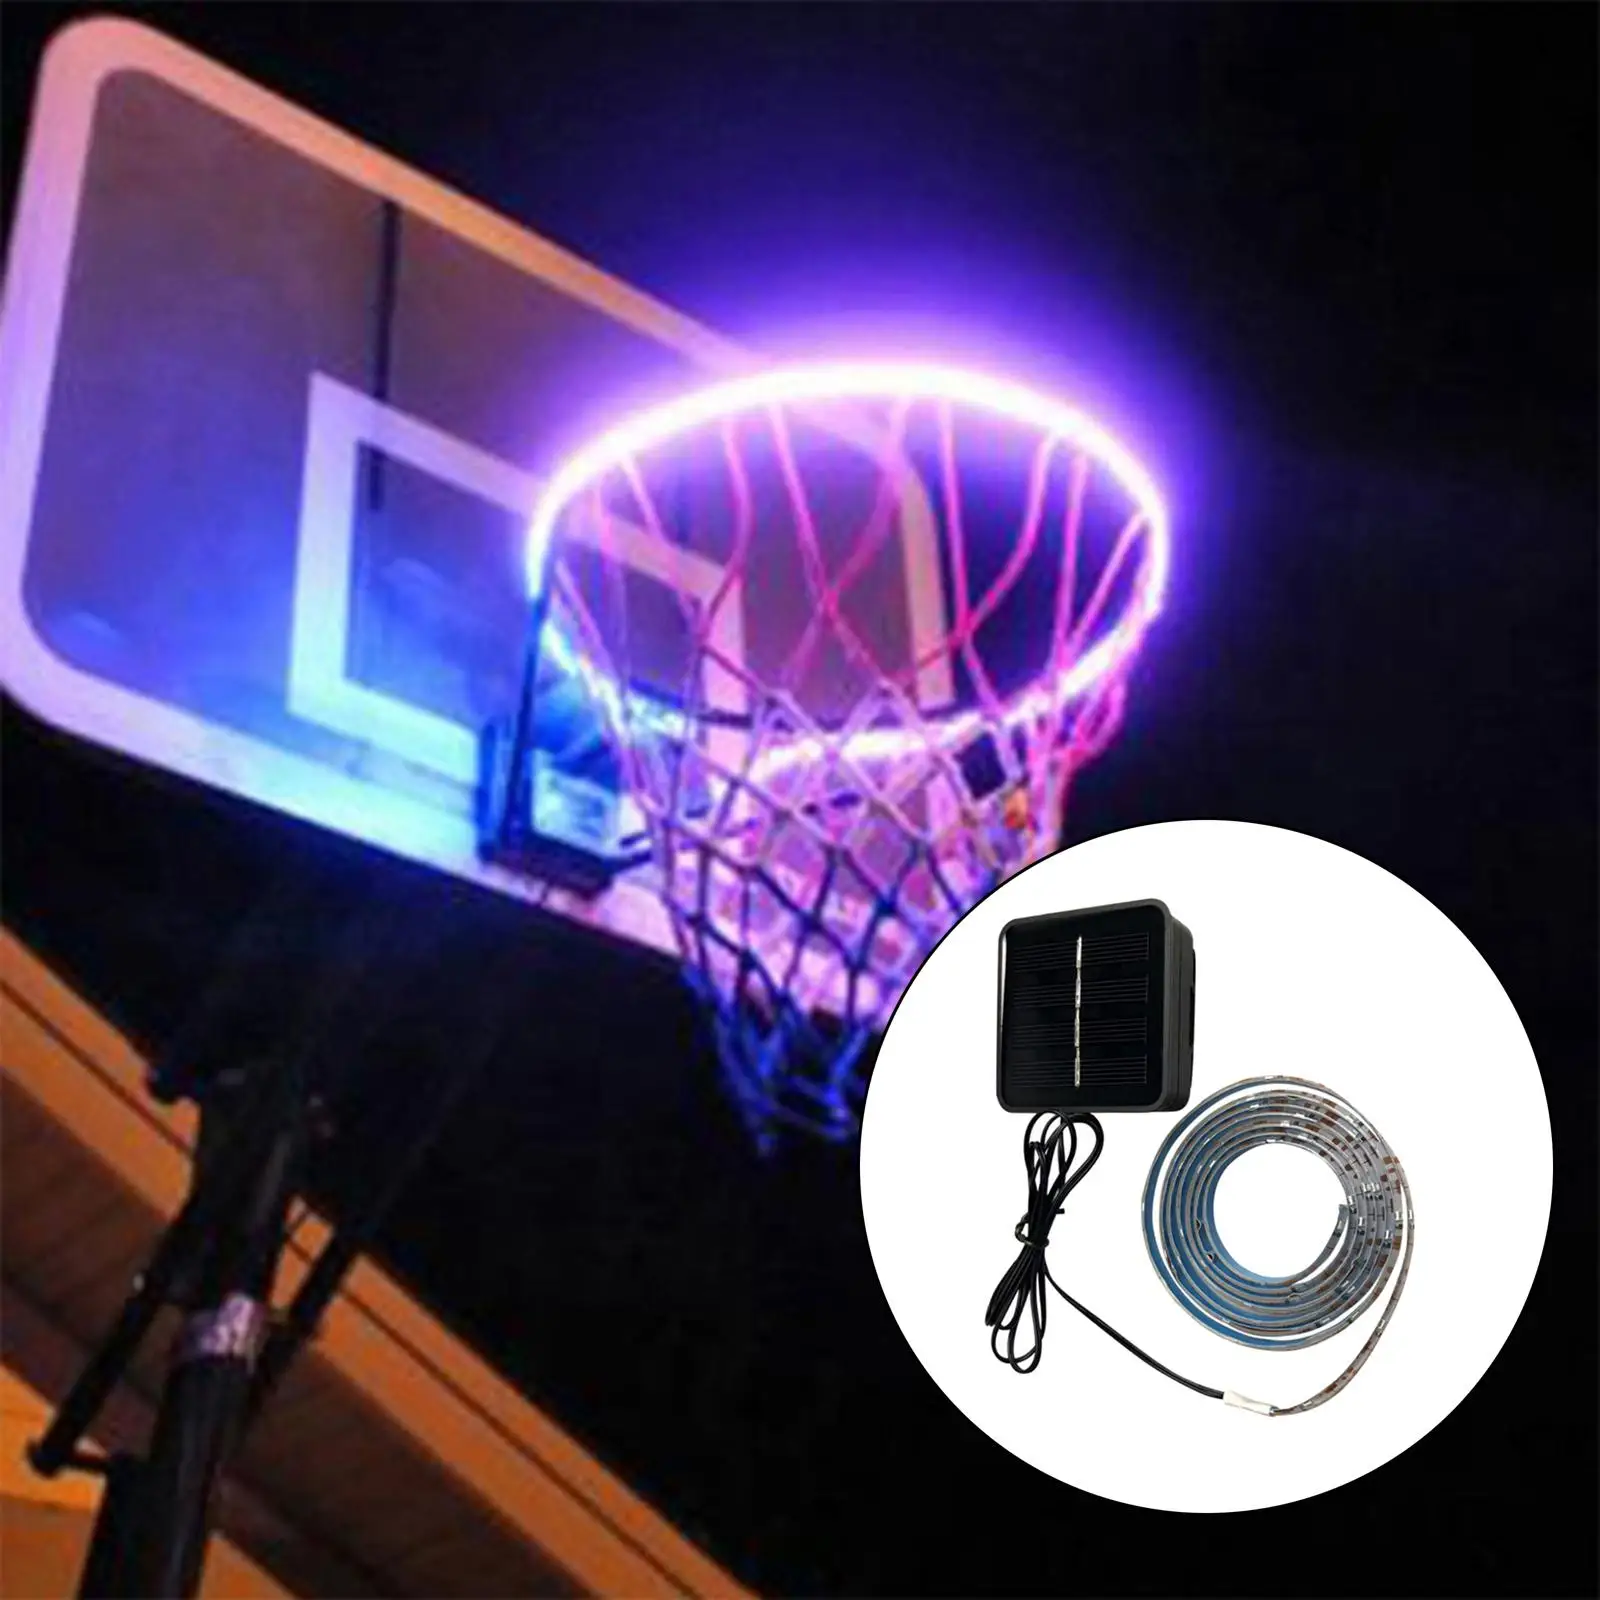 Solar Power LED Basketball Hoop Light Color-Changing Sensor Super Bright RGB LED Strip Lamp for Outdoors Sports Training Adults